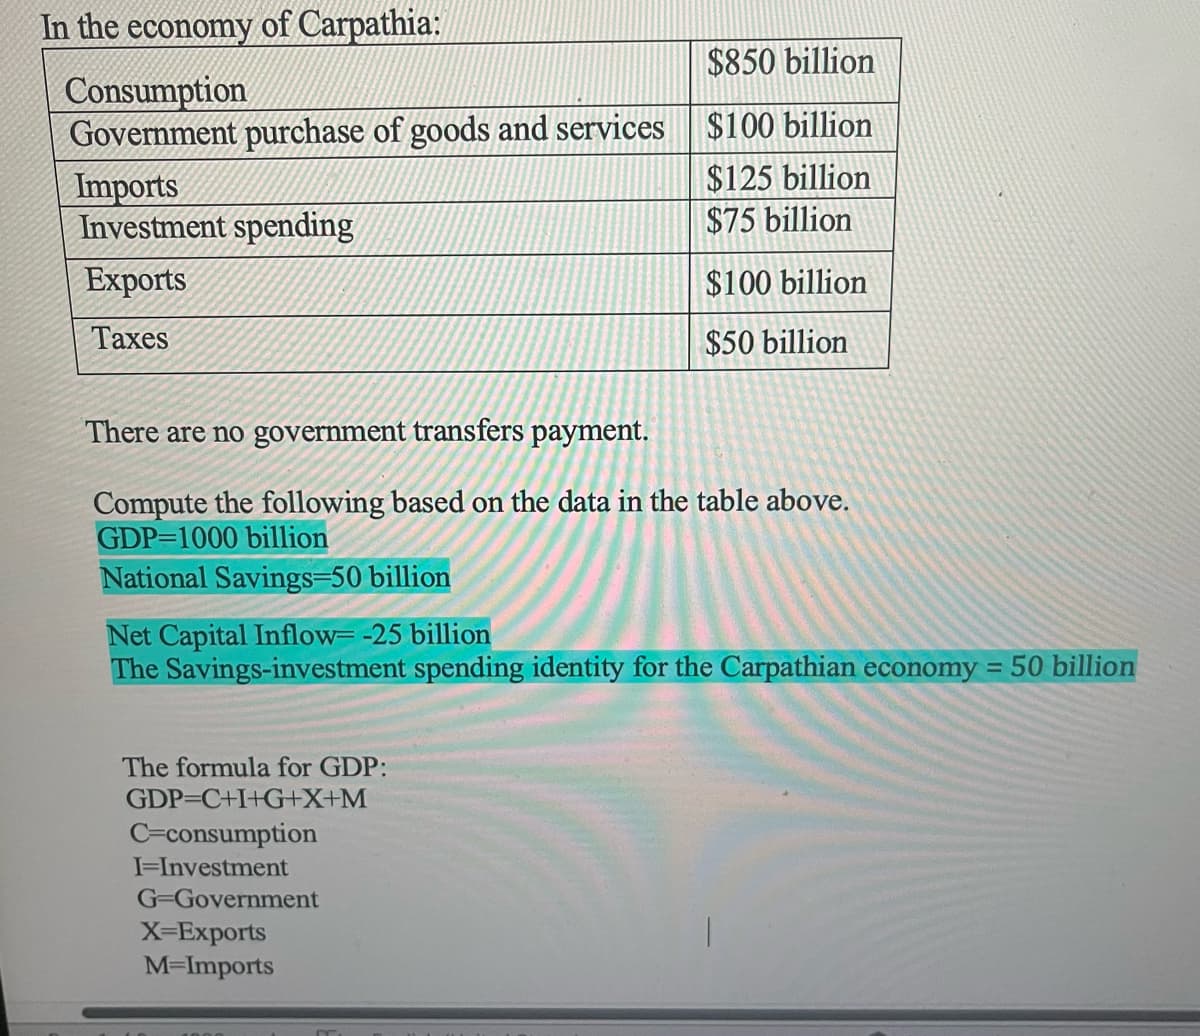 In the economy of Carpathia:
$850 billion
Consumption
Government purchase of goods and services
$100 billion
Imports
$125 billion
Investment spending
$75 billion
Exports
$100 billion
Taxes
$50 billion
There are no government transfers payment.
Compute the following based on the data in the table above.
GDP=1000 billion
National Savings=50 billion
Net Capital Inflow= -25 billion
The Savings-investment spending identity for the Carpathian economy = 50 billion
The formula for GDP:
GDP=C+I+G+X+M
C=consumption
I-Investment
G-Government
X=Exports
M=Imports